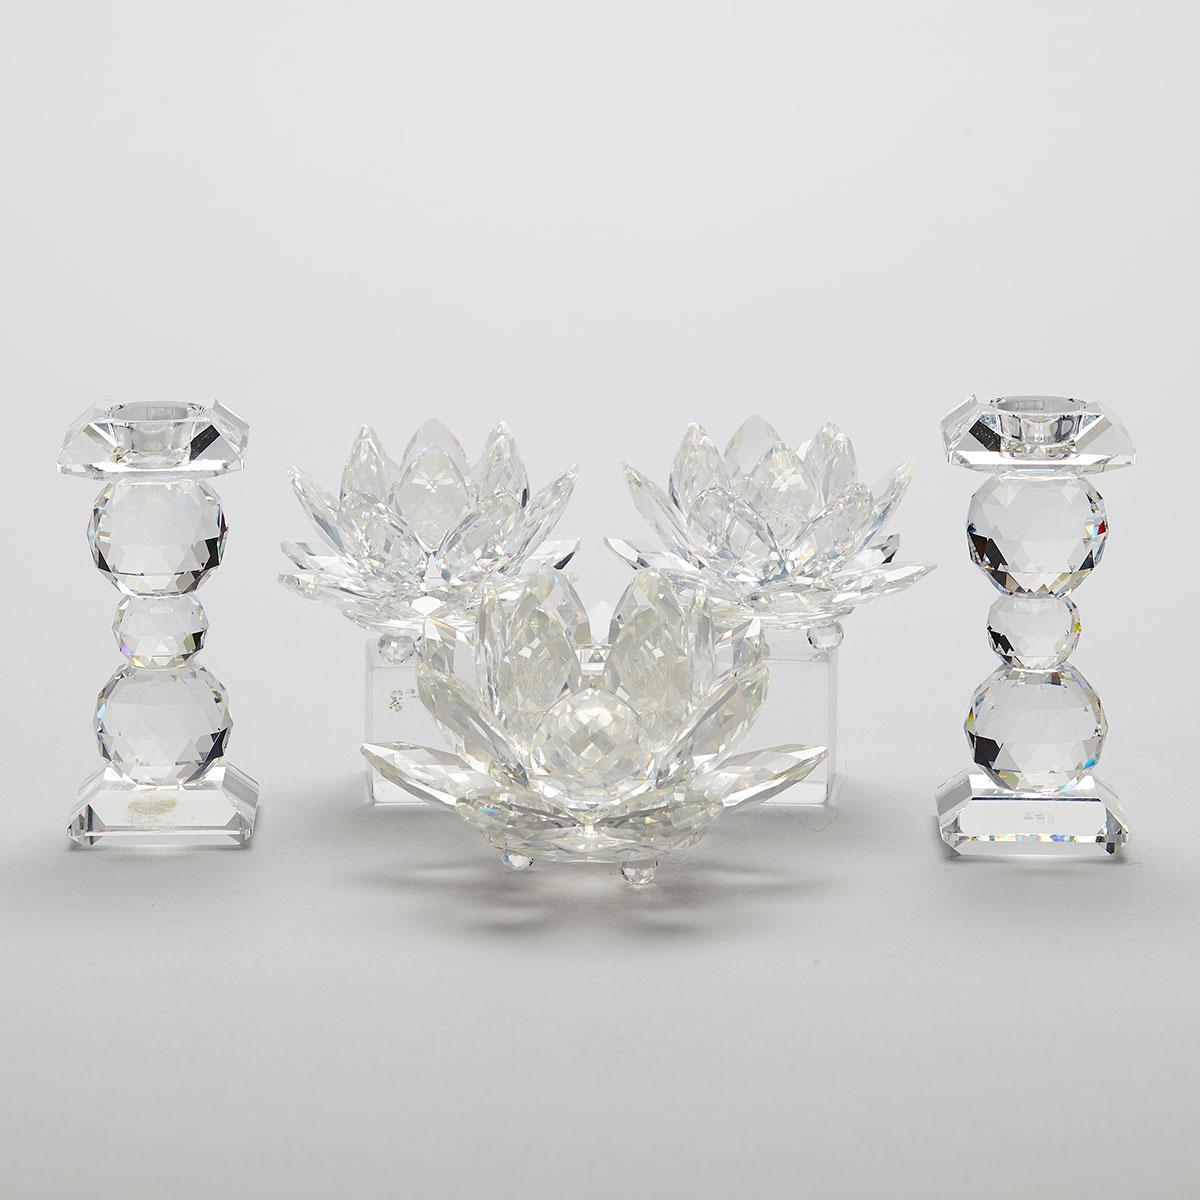 Three Swarovski Crystal Waterlily Candleholders and Pair of Candlesticks, late 20th century